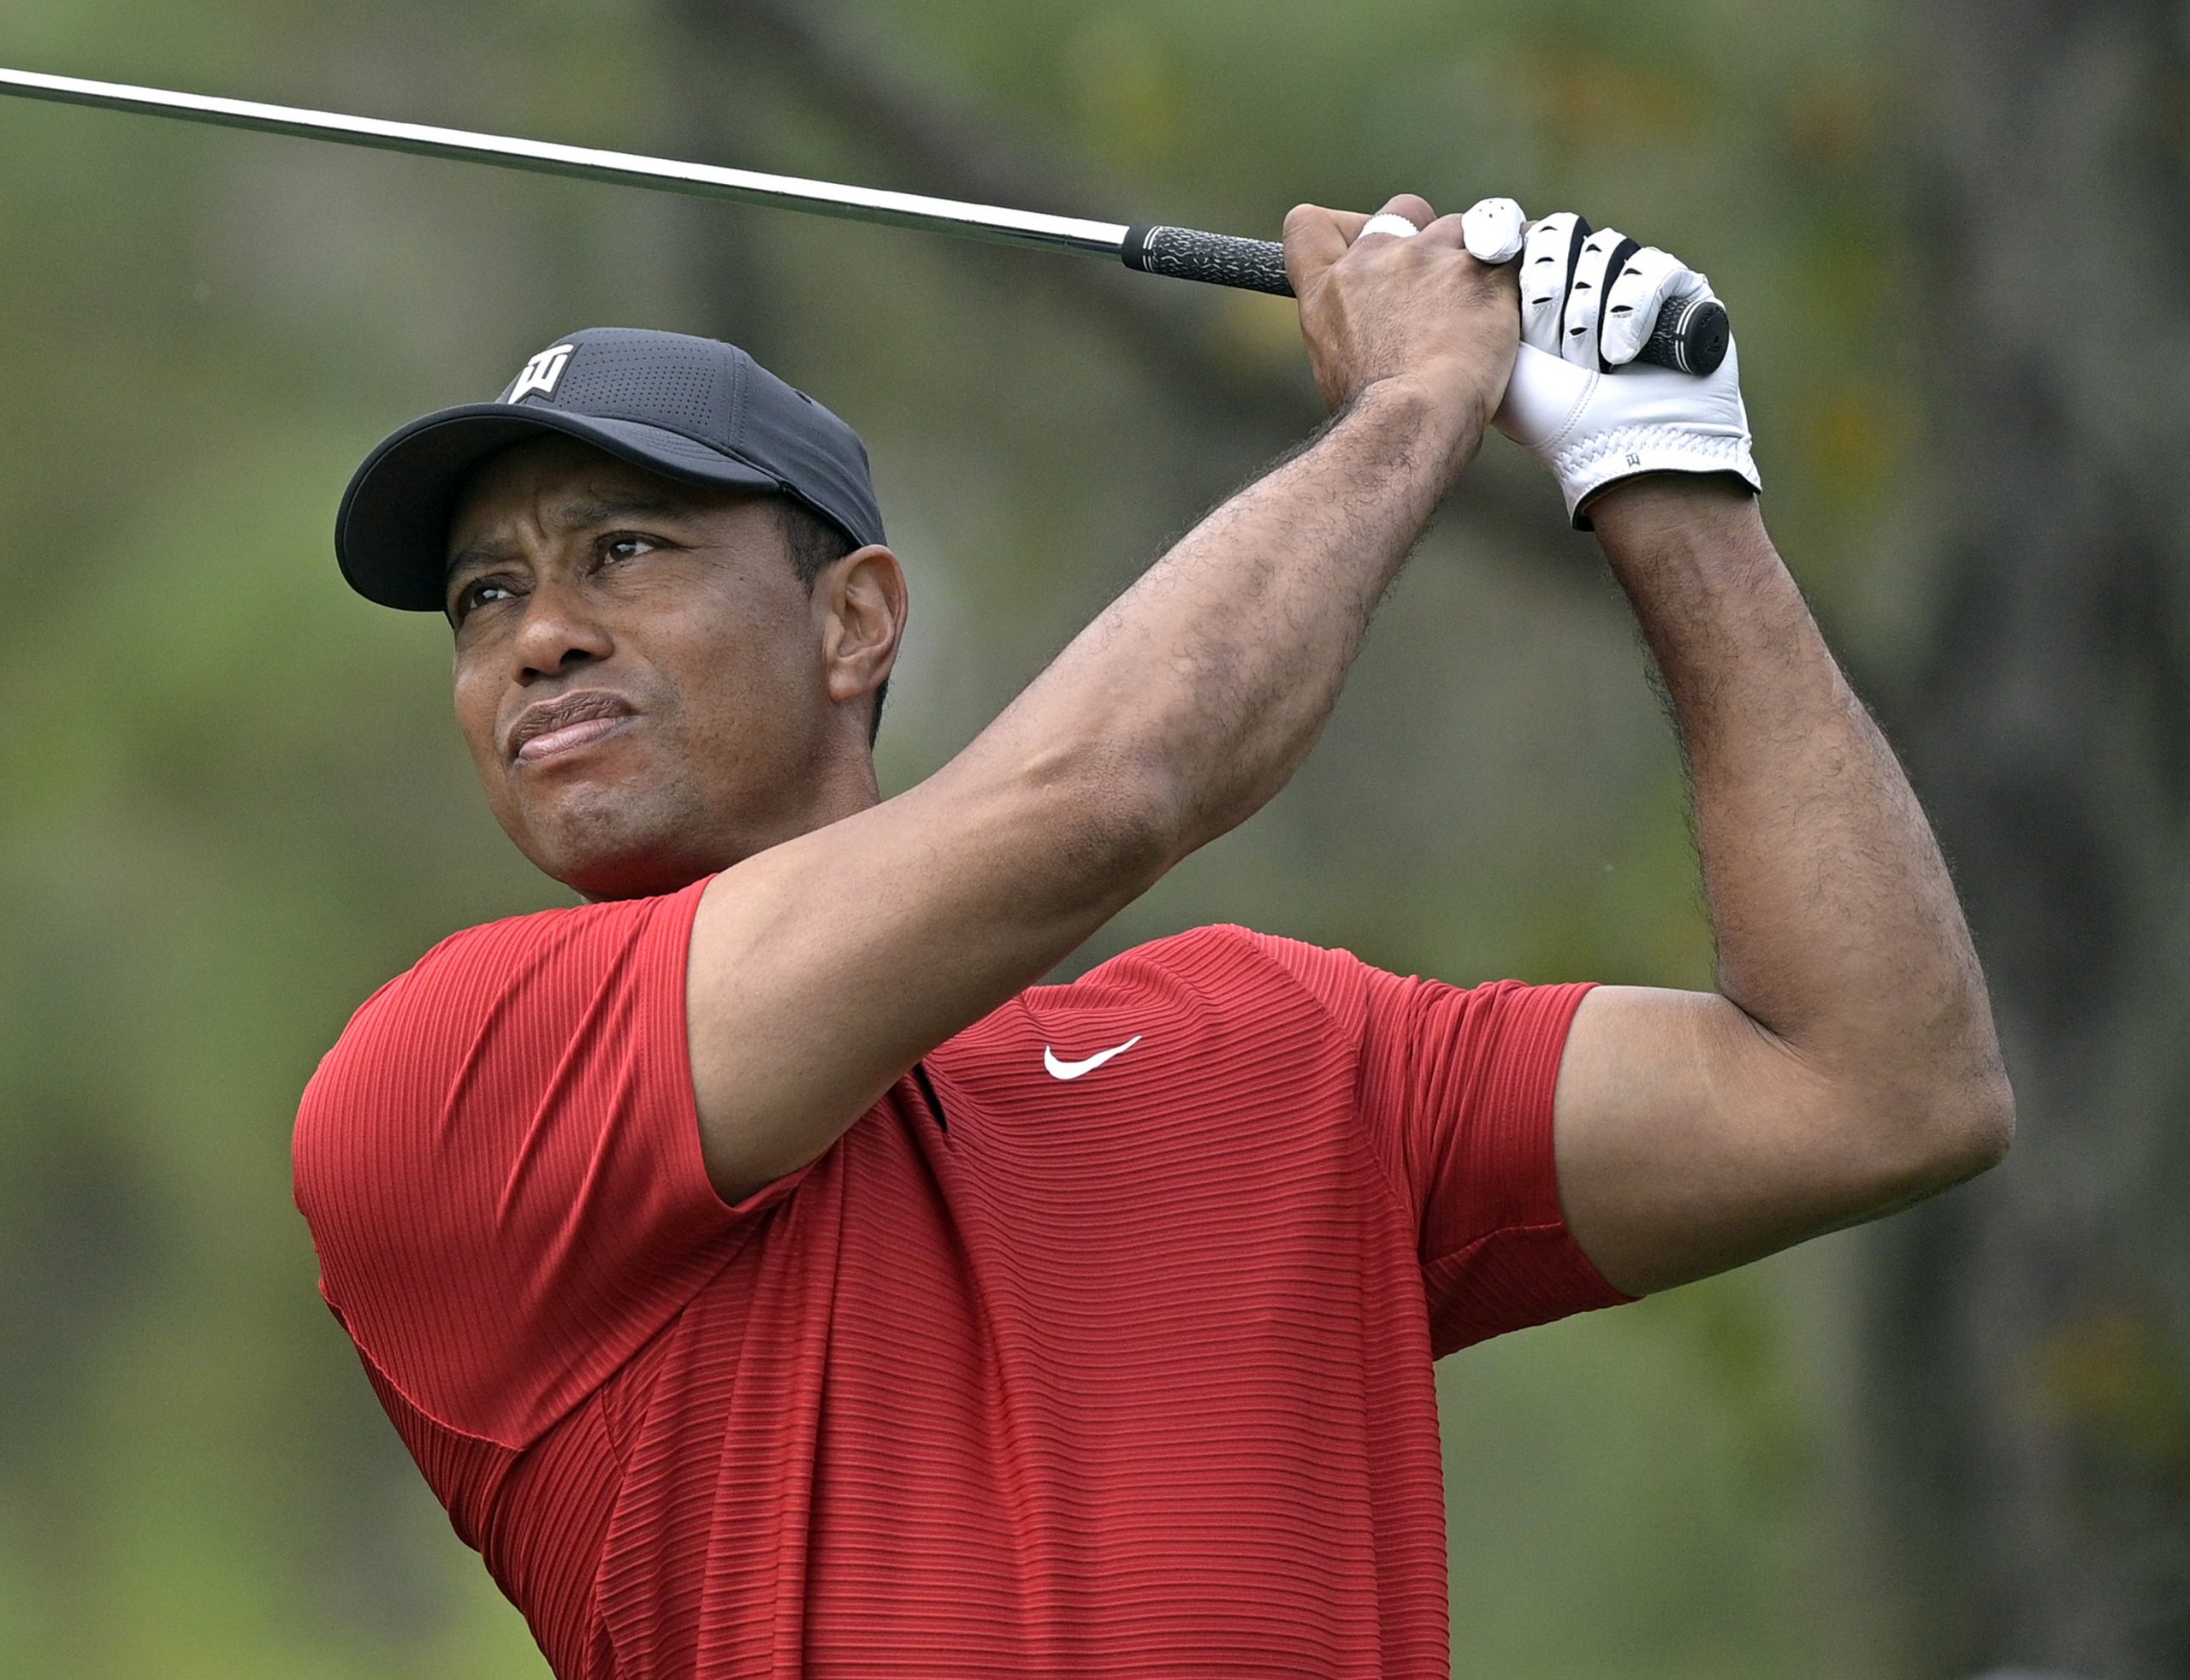 How to Hit a Stinger in Golf: 5 Steps for Replicating Tiger Woods